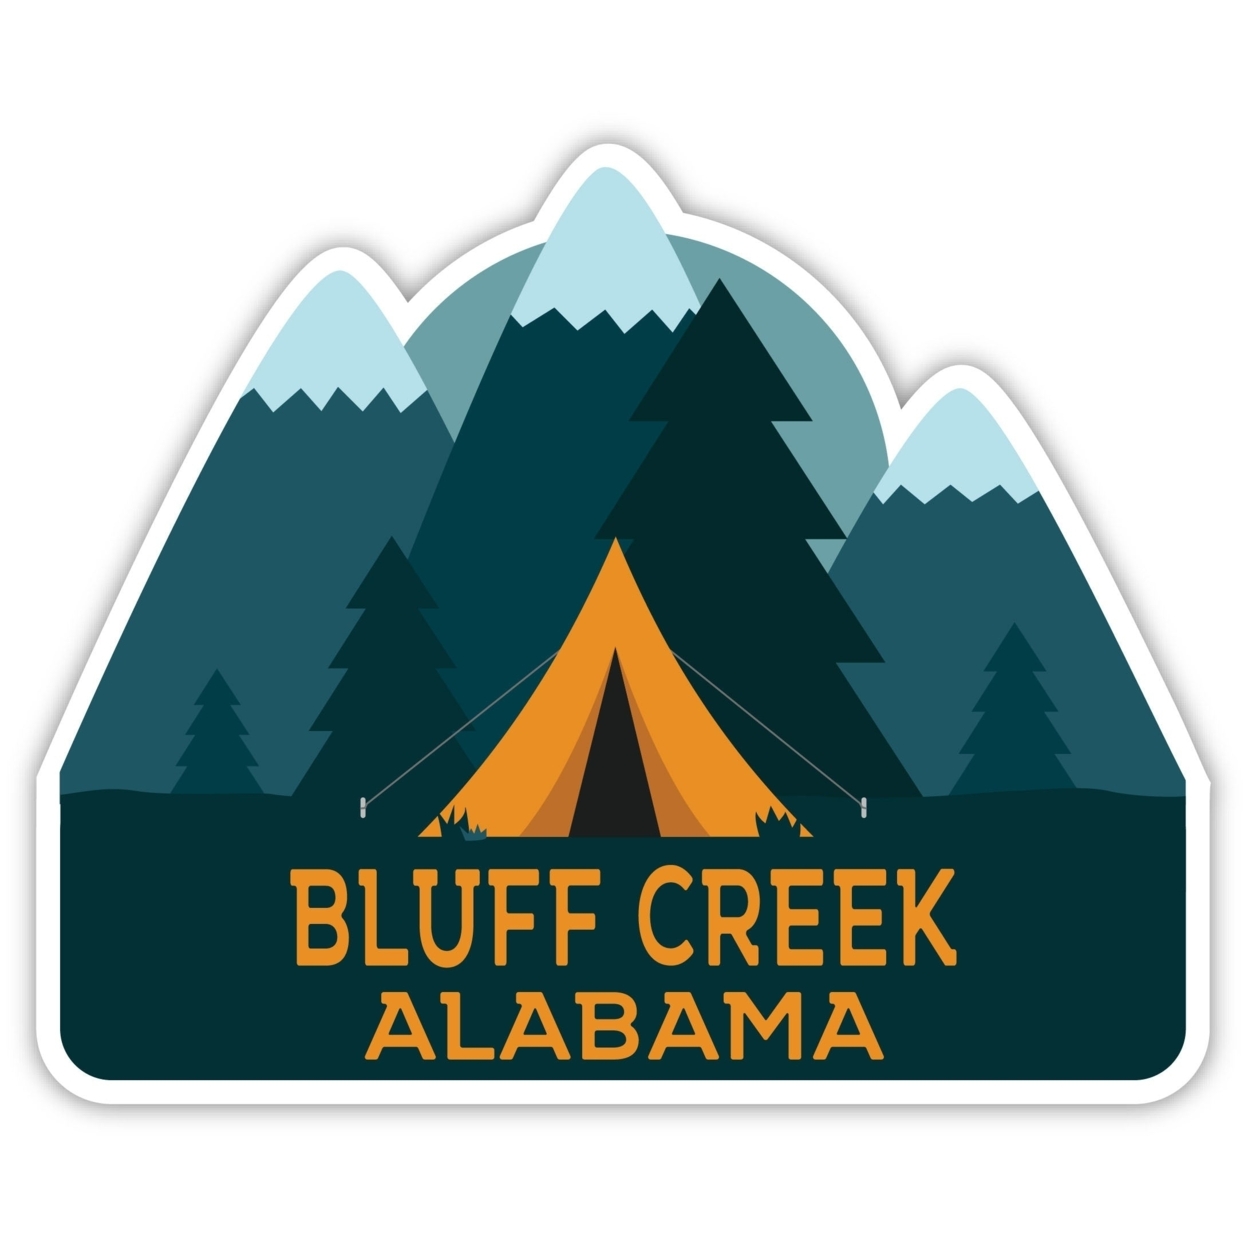 Bluff Creek Alabama Souvenir Decorative Stickers (Choose Theme And Size) - 4-Pack, 6-Inch, Tent